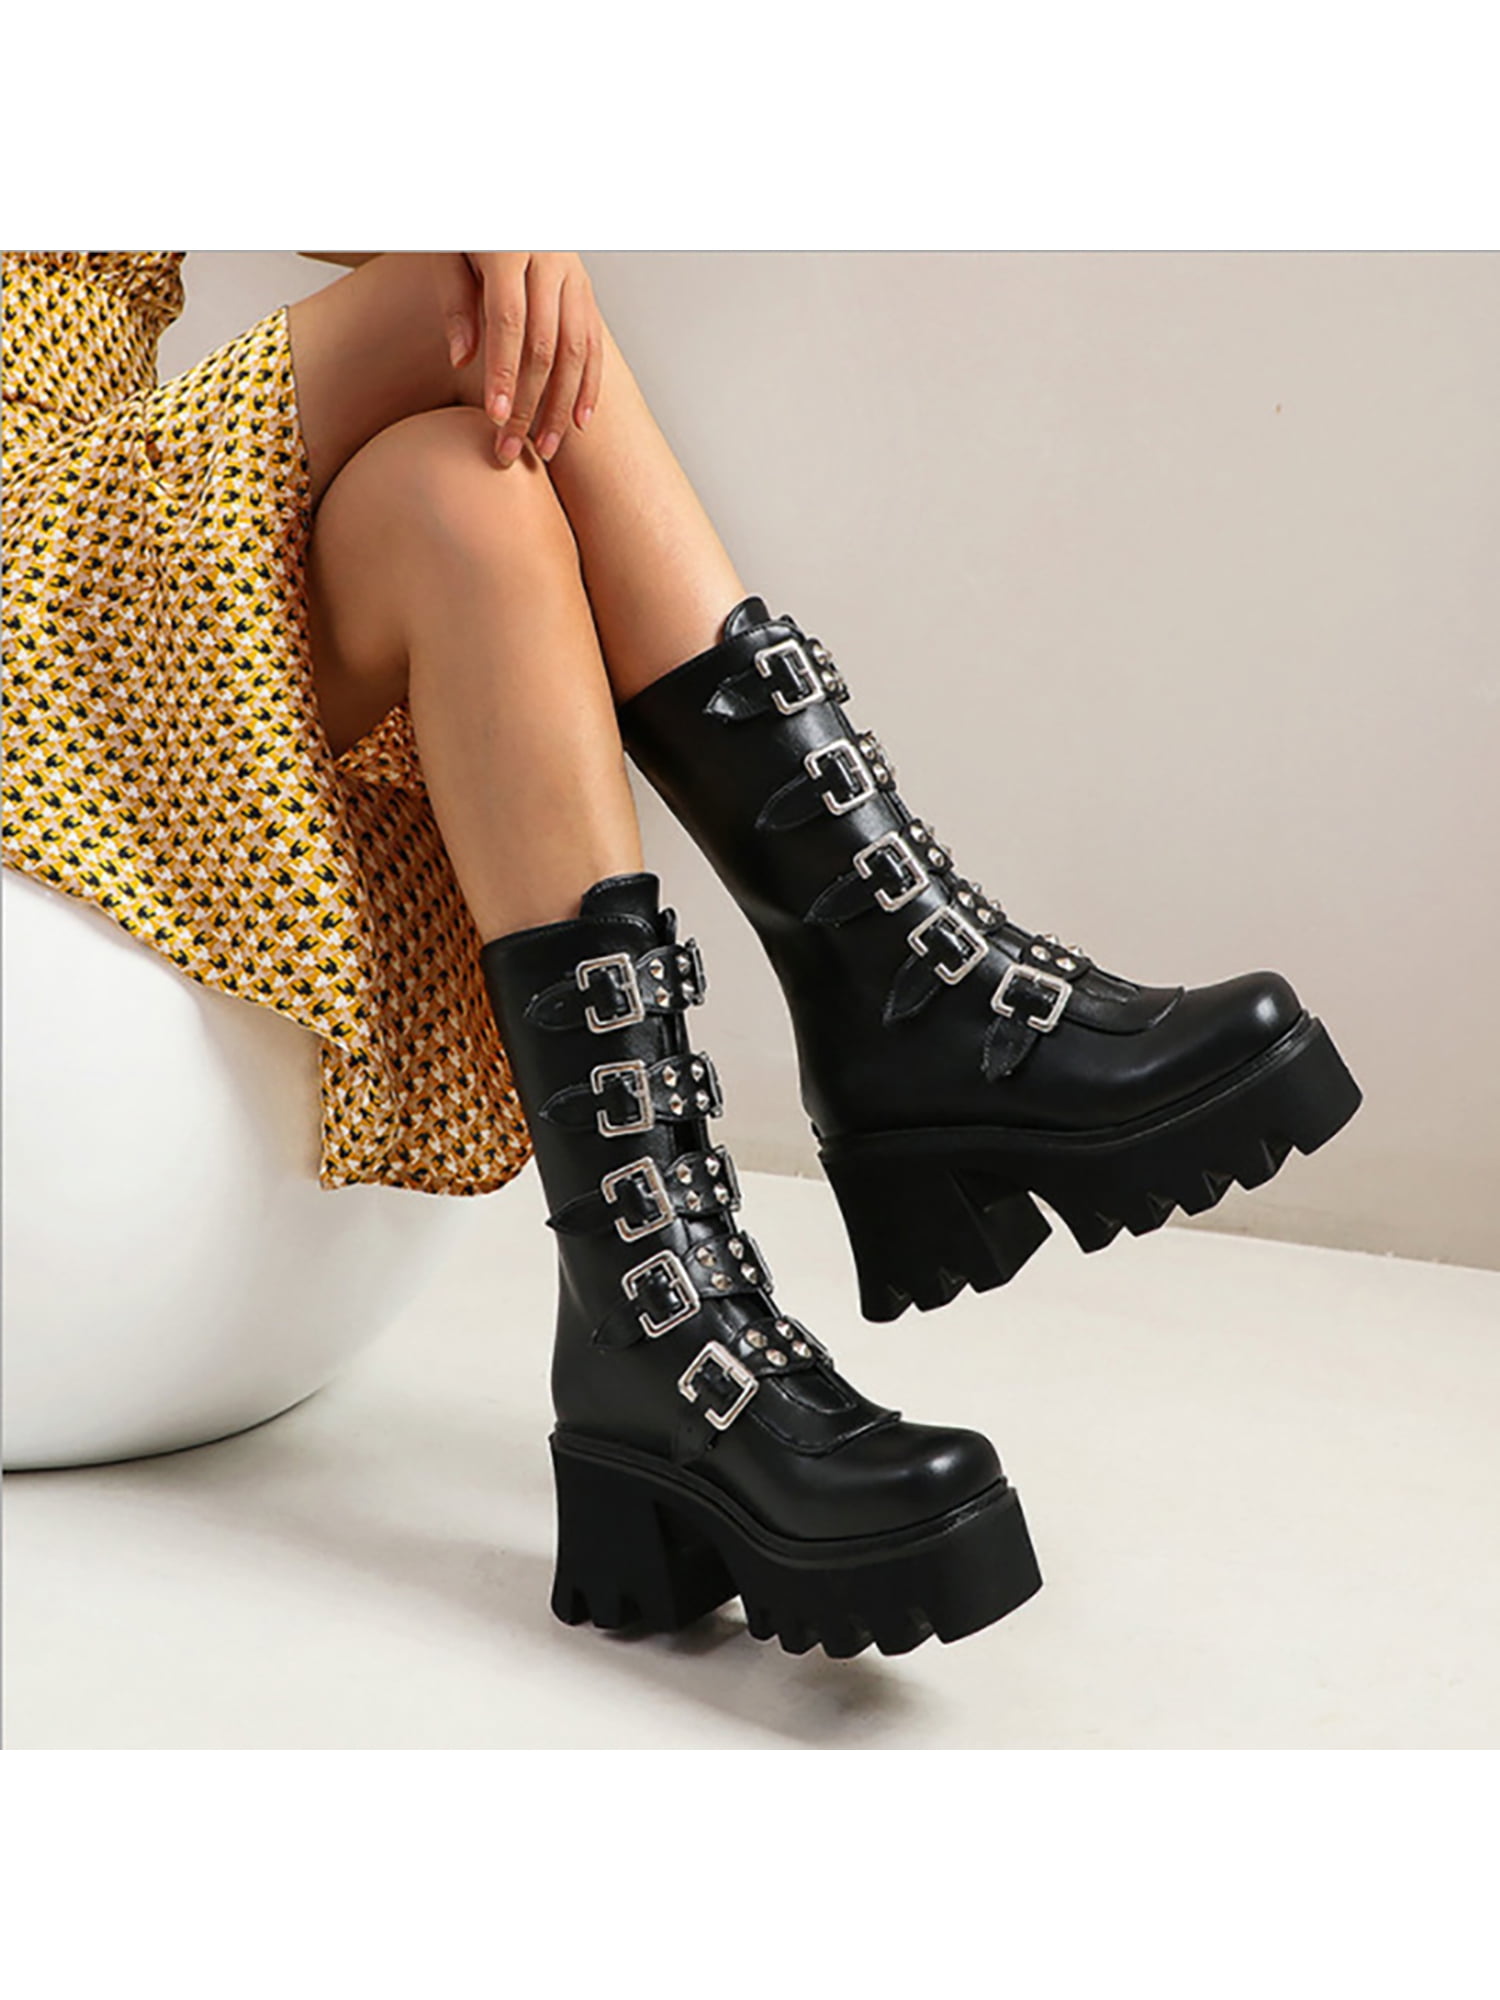 Womens Lady Punk Lace Up Knee High boots Gothic Riding moto Boots wedge heel Sz 